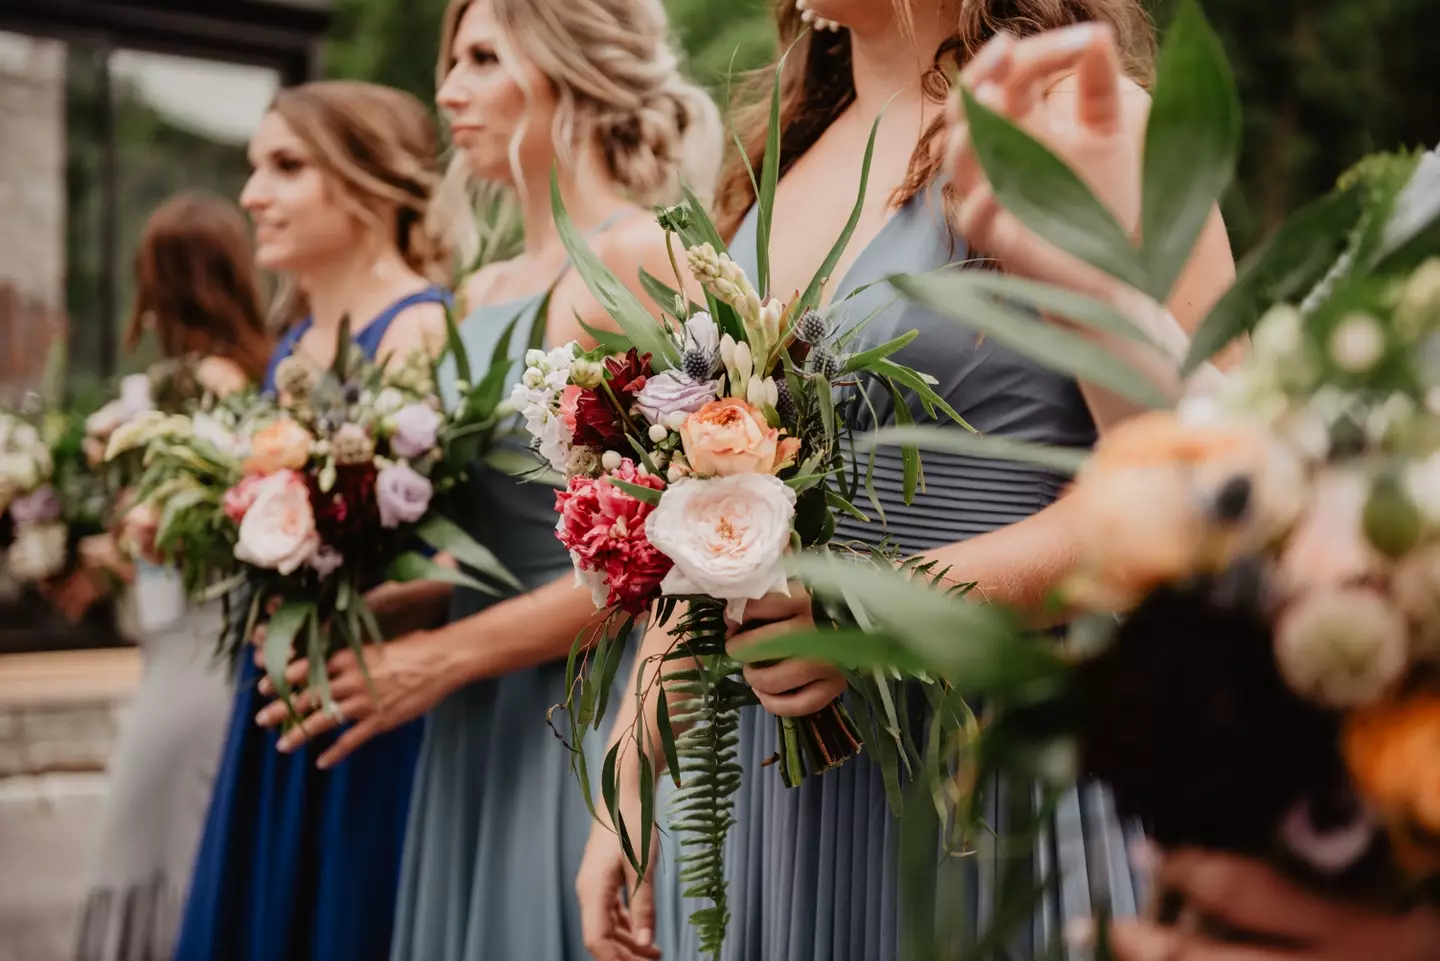 Being asked to be a bridesmaid is an honour, but what happens if you don’t want to do it?